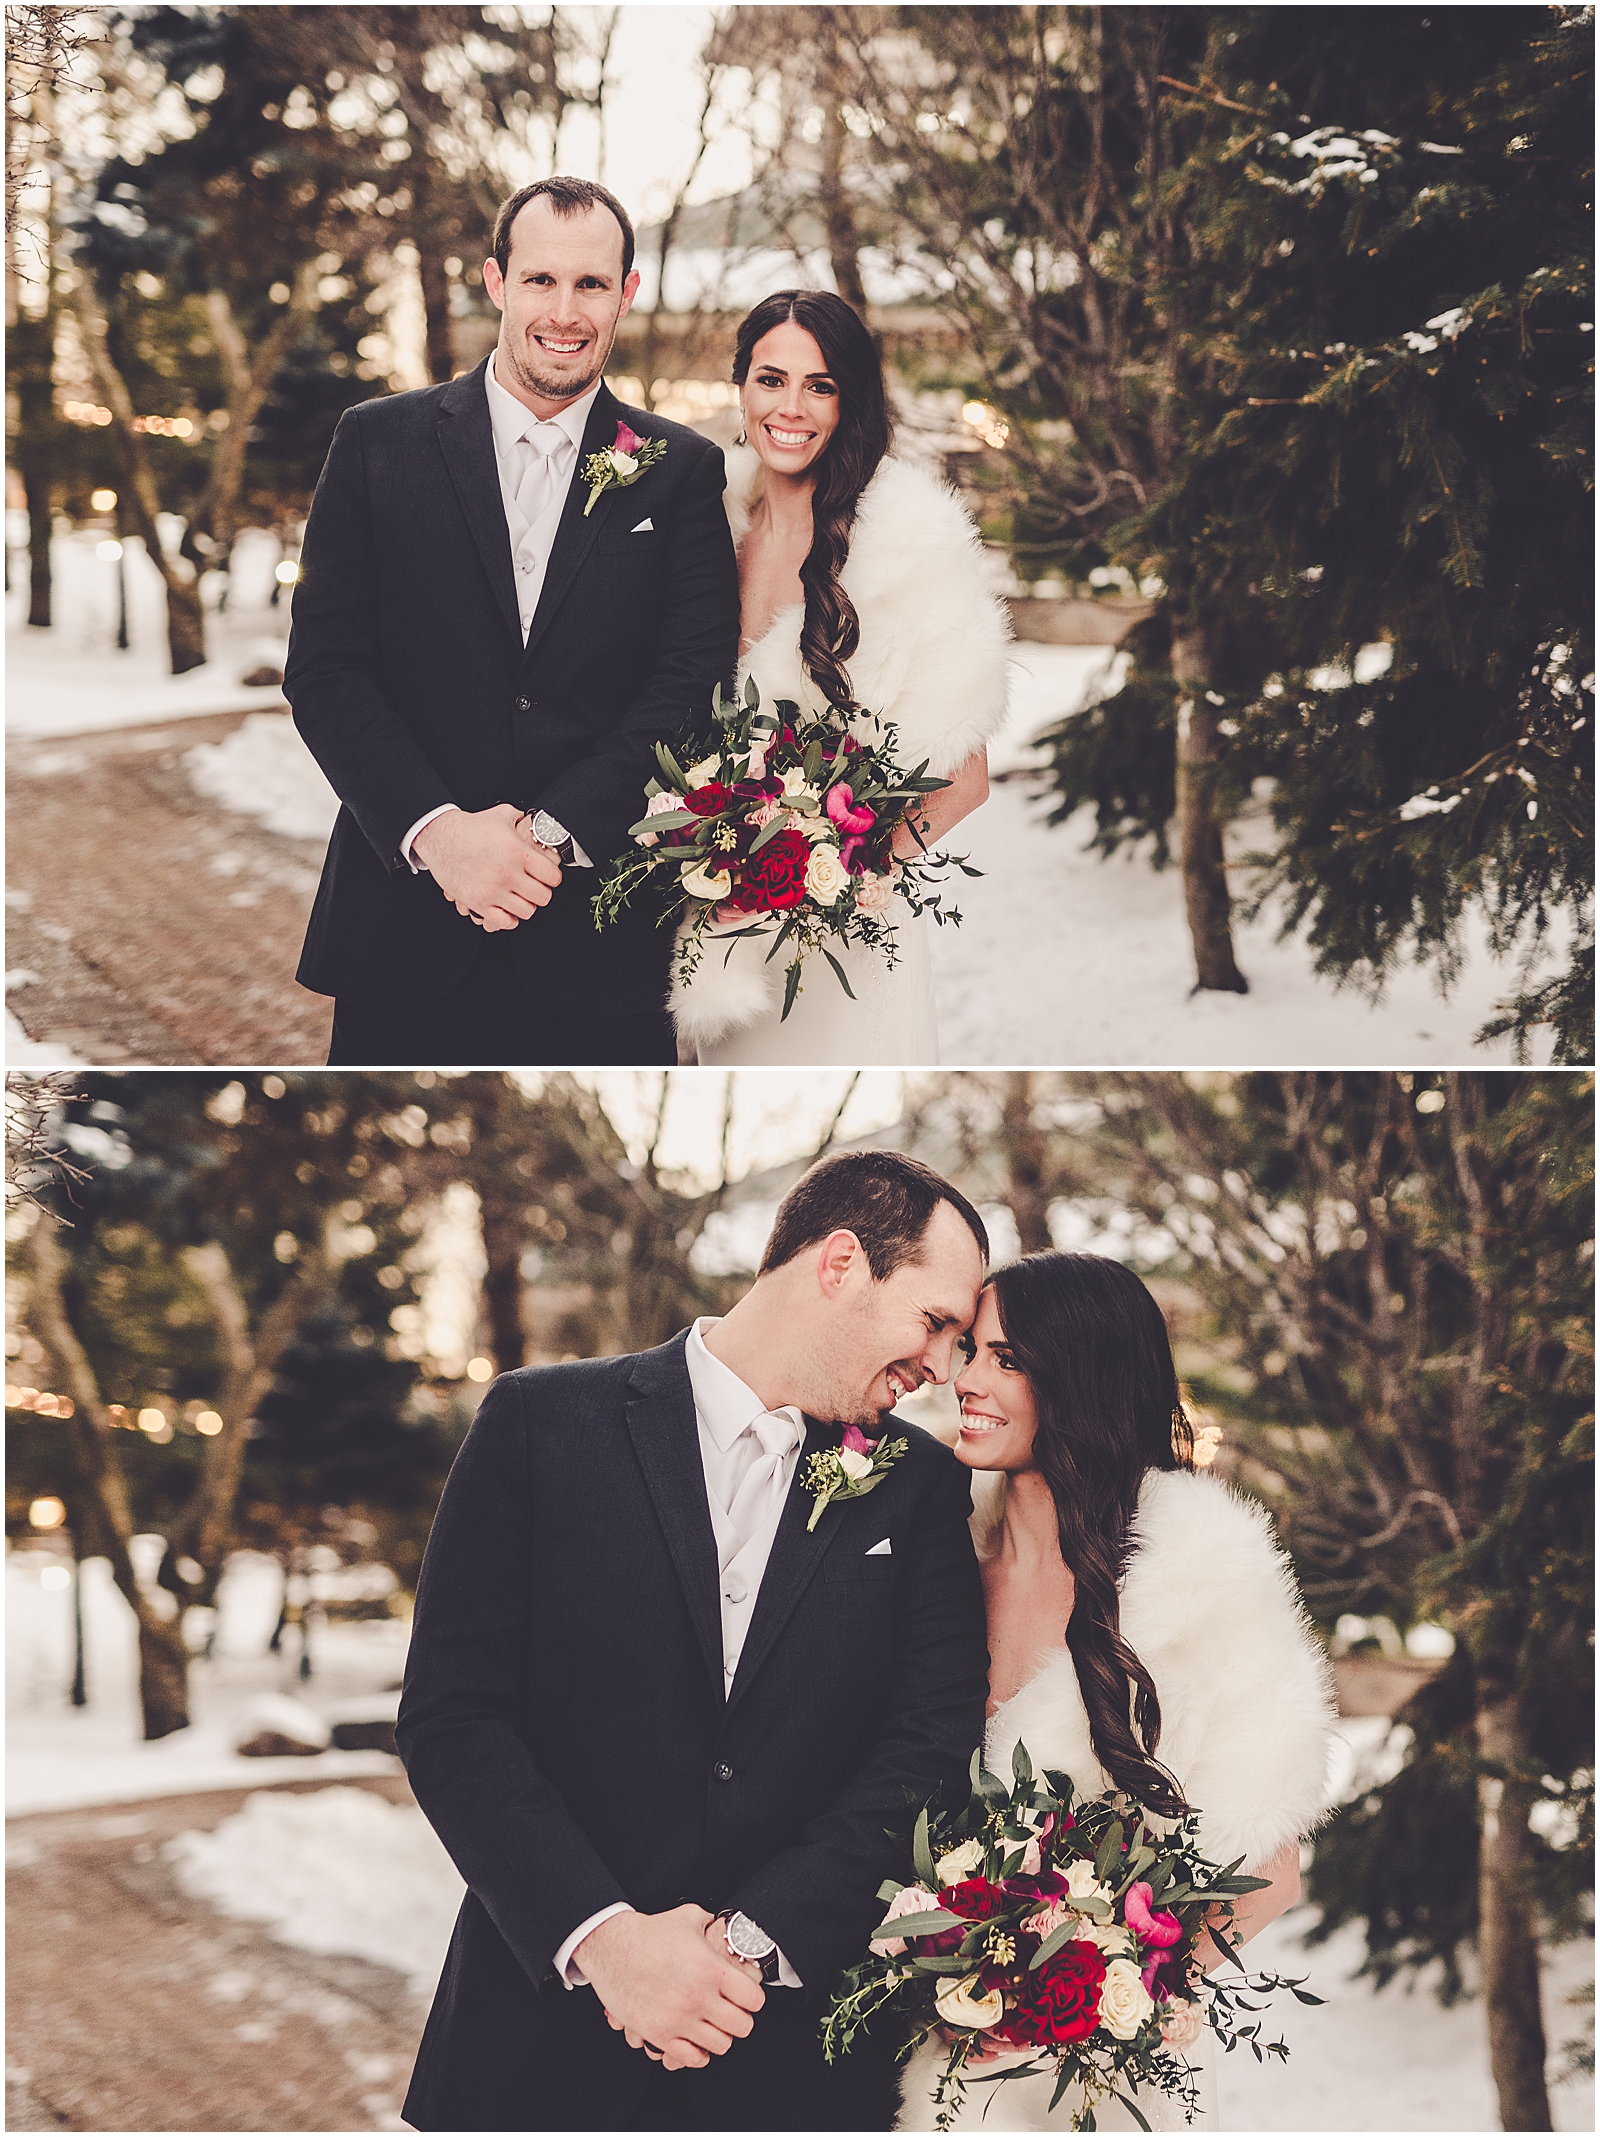 Jen and Tom's winter wedding at CD&ME in Frankfort, IL with Chicagoland wedding photographer Kara Evans Photographer.